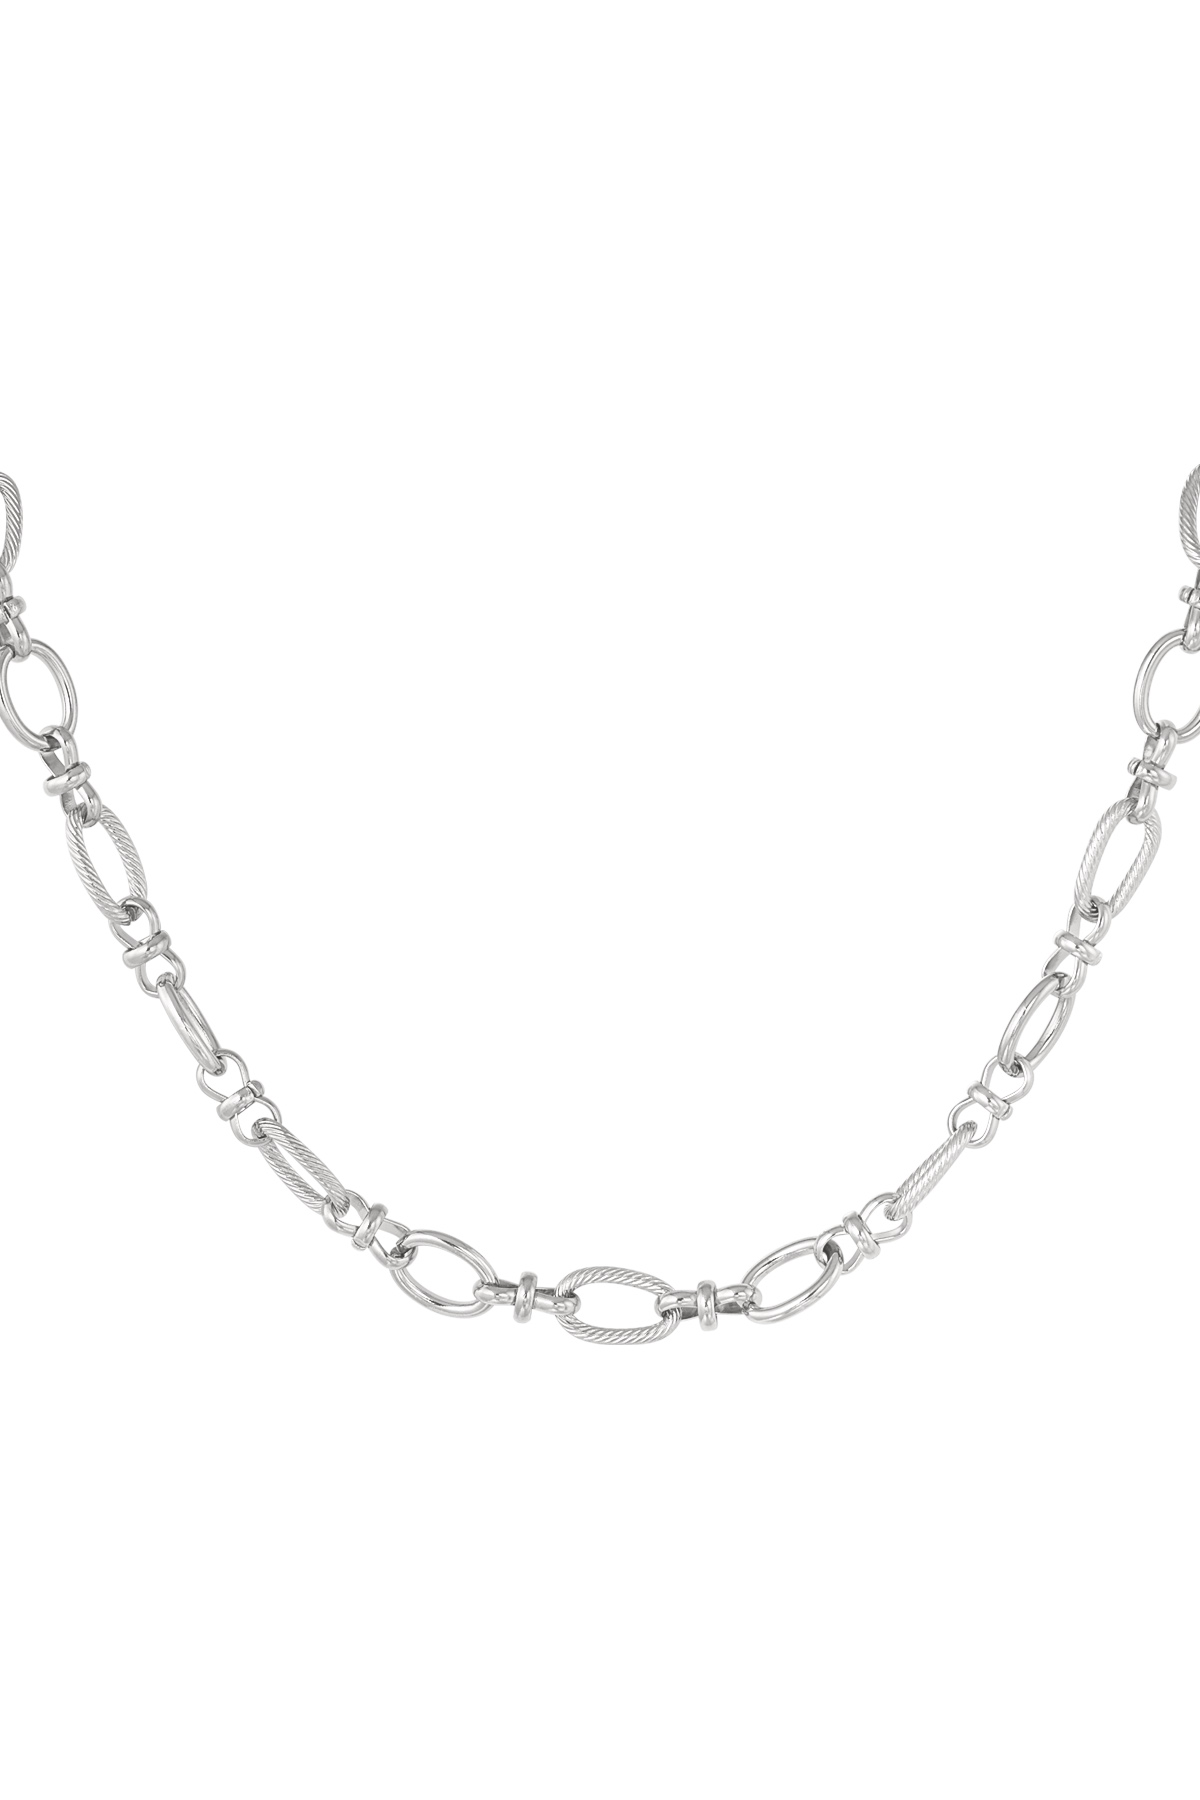 Link chain different links - silver h5 